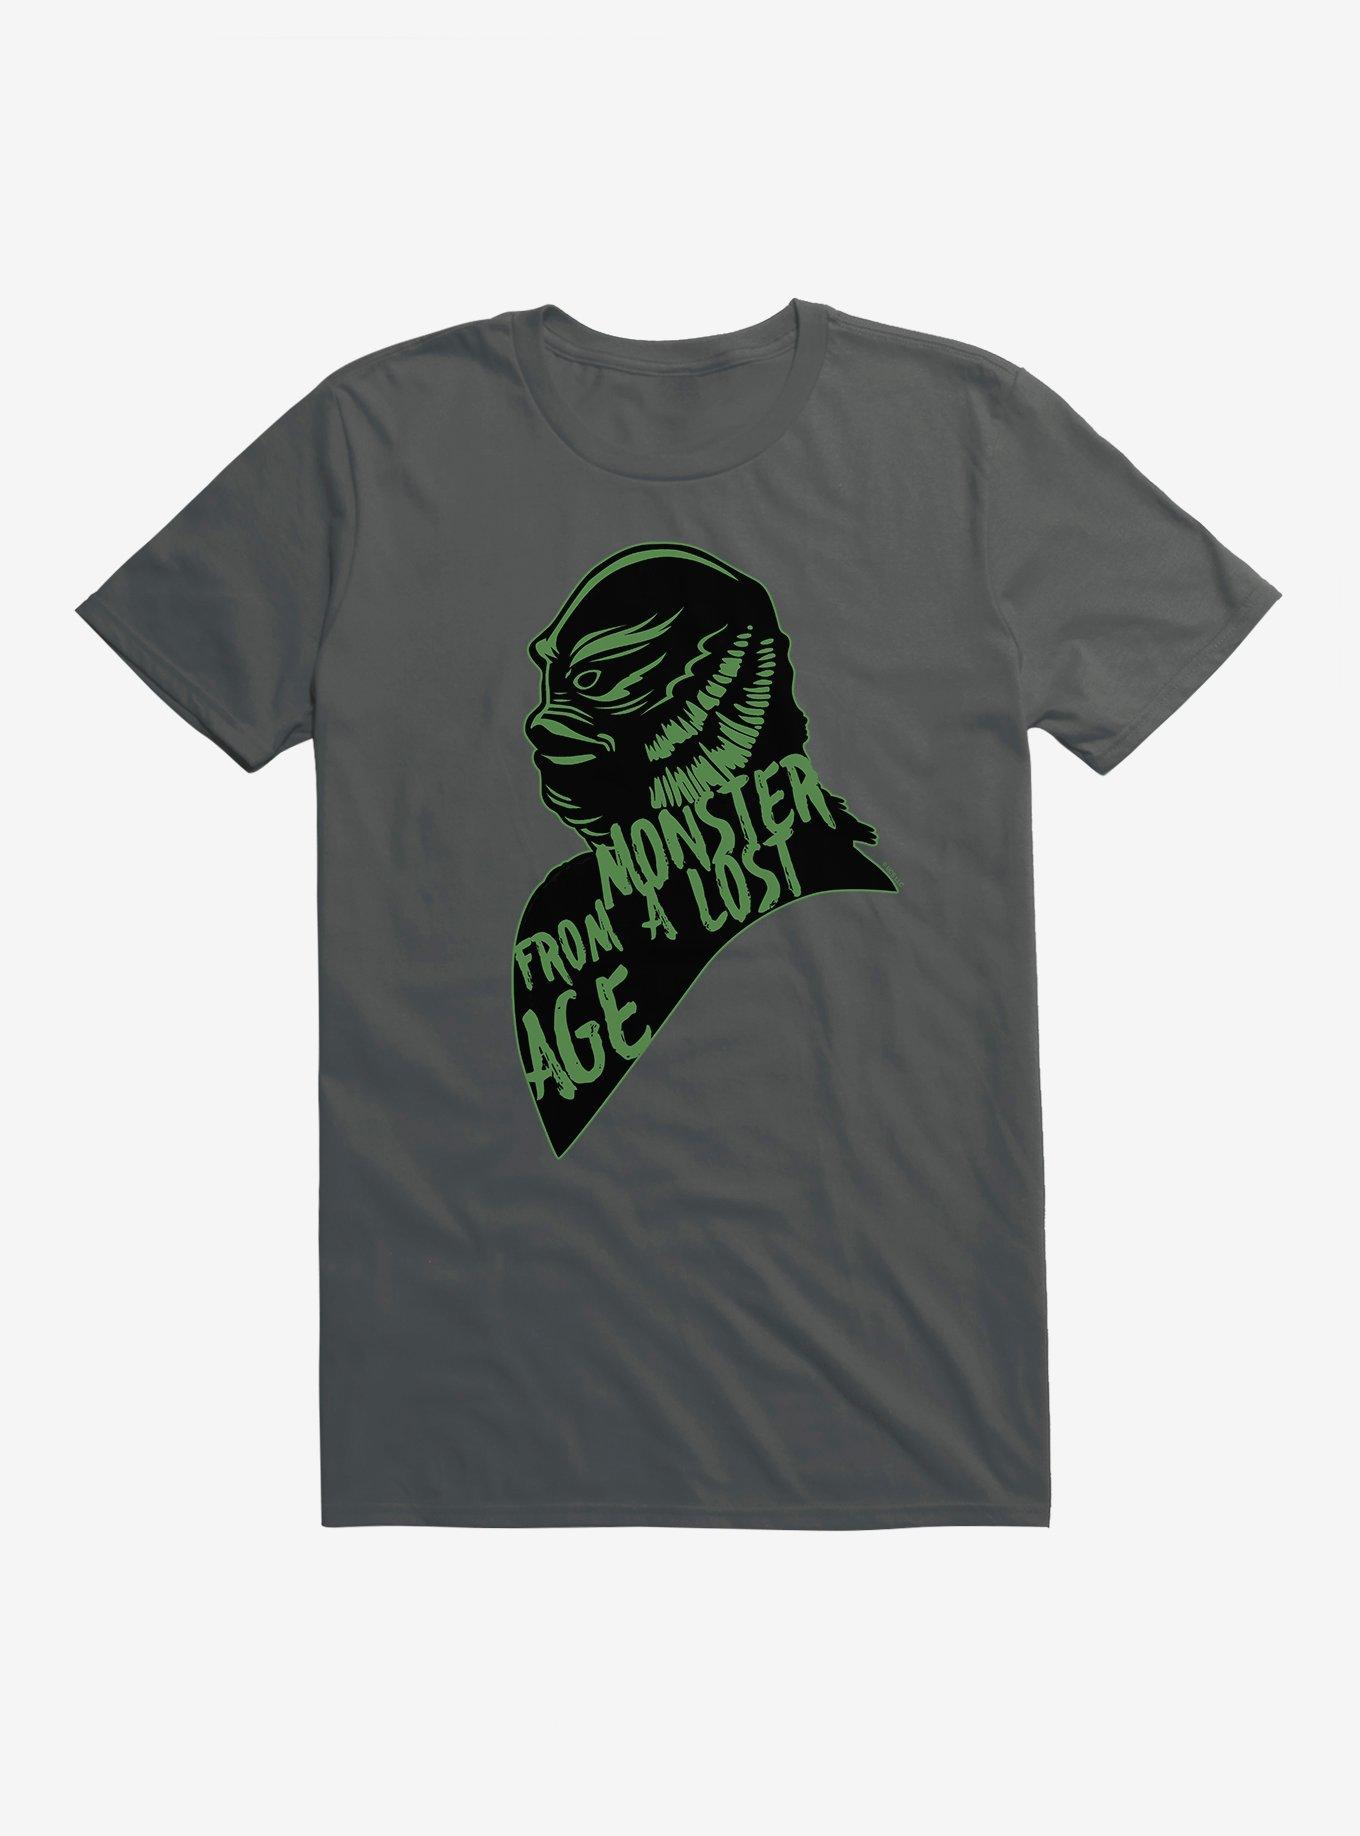 Universal Monsters Creature From The Black Lagoon Monster From A Lost Age T-Shirt, CHARCOAL, hi-res